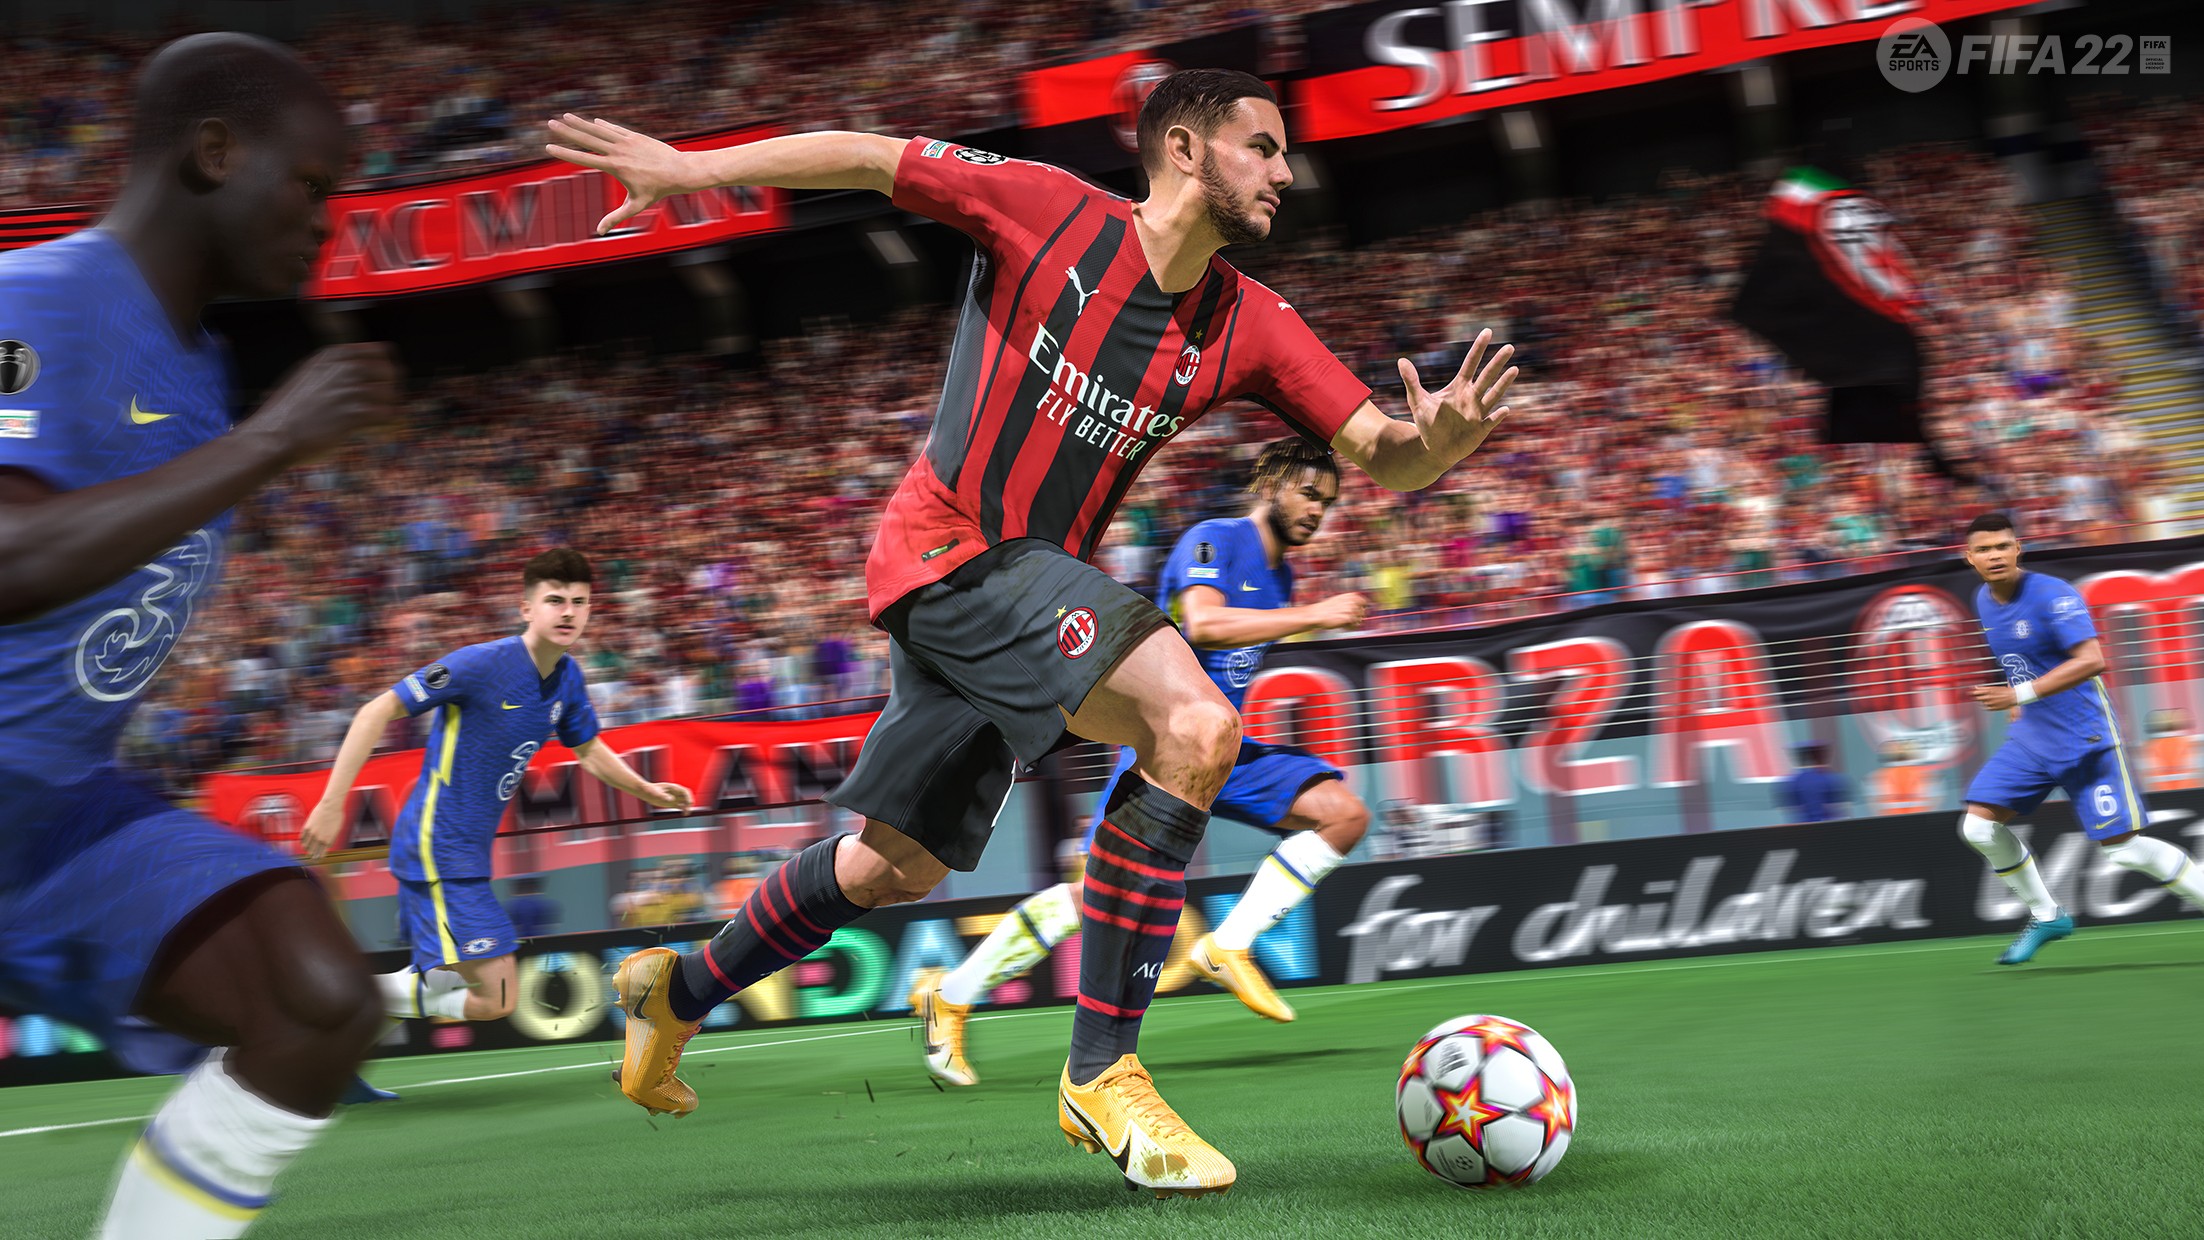 FIFA 22 guide with all you need for Ultimate Team, Career Mode and beyond